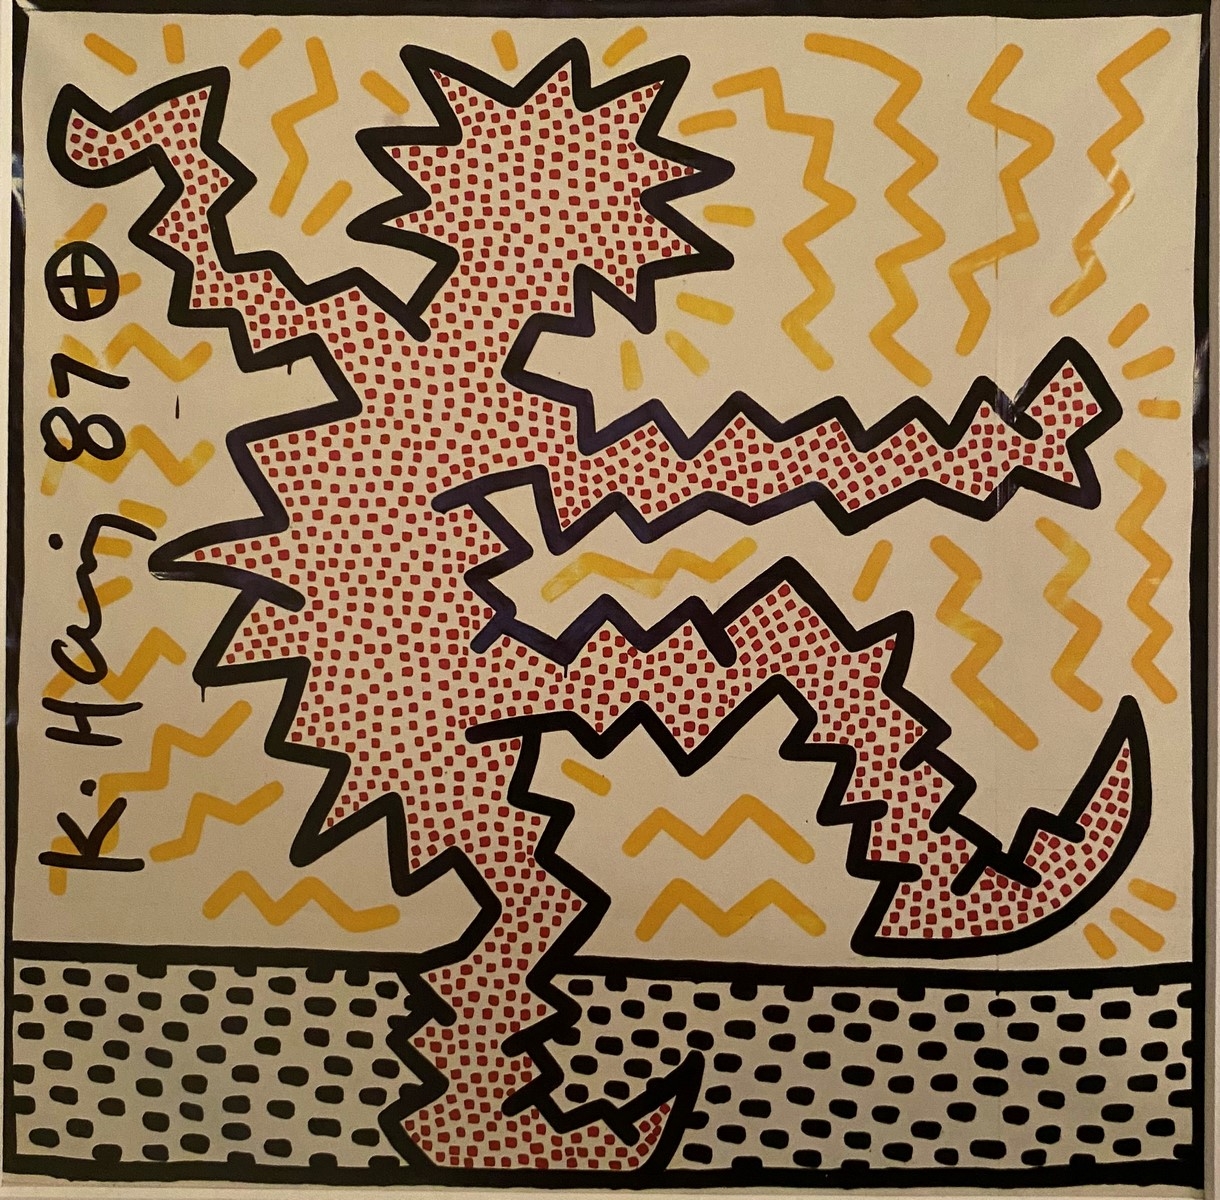 Untitled by Keith Haring, 1987